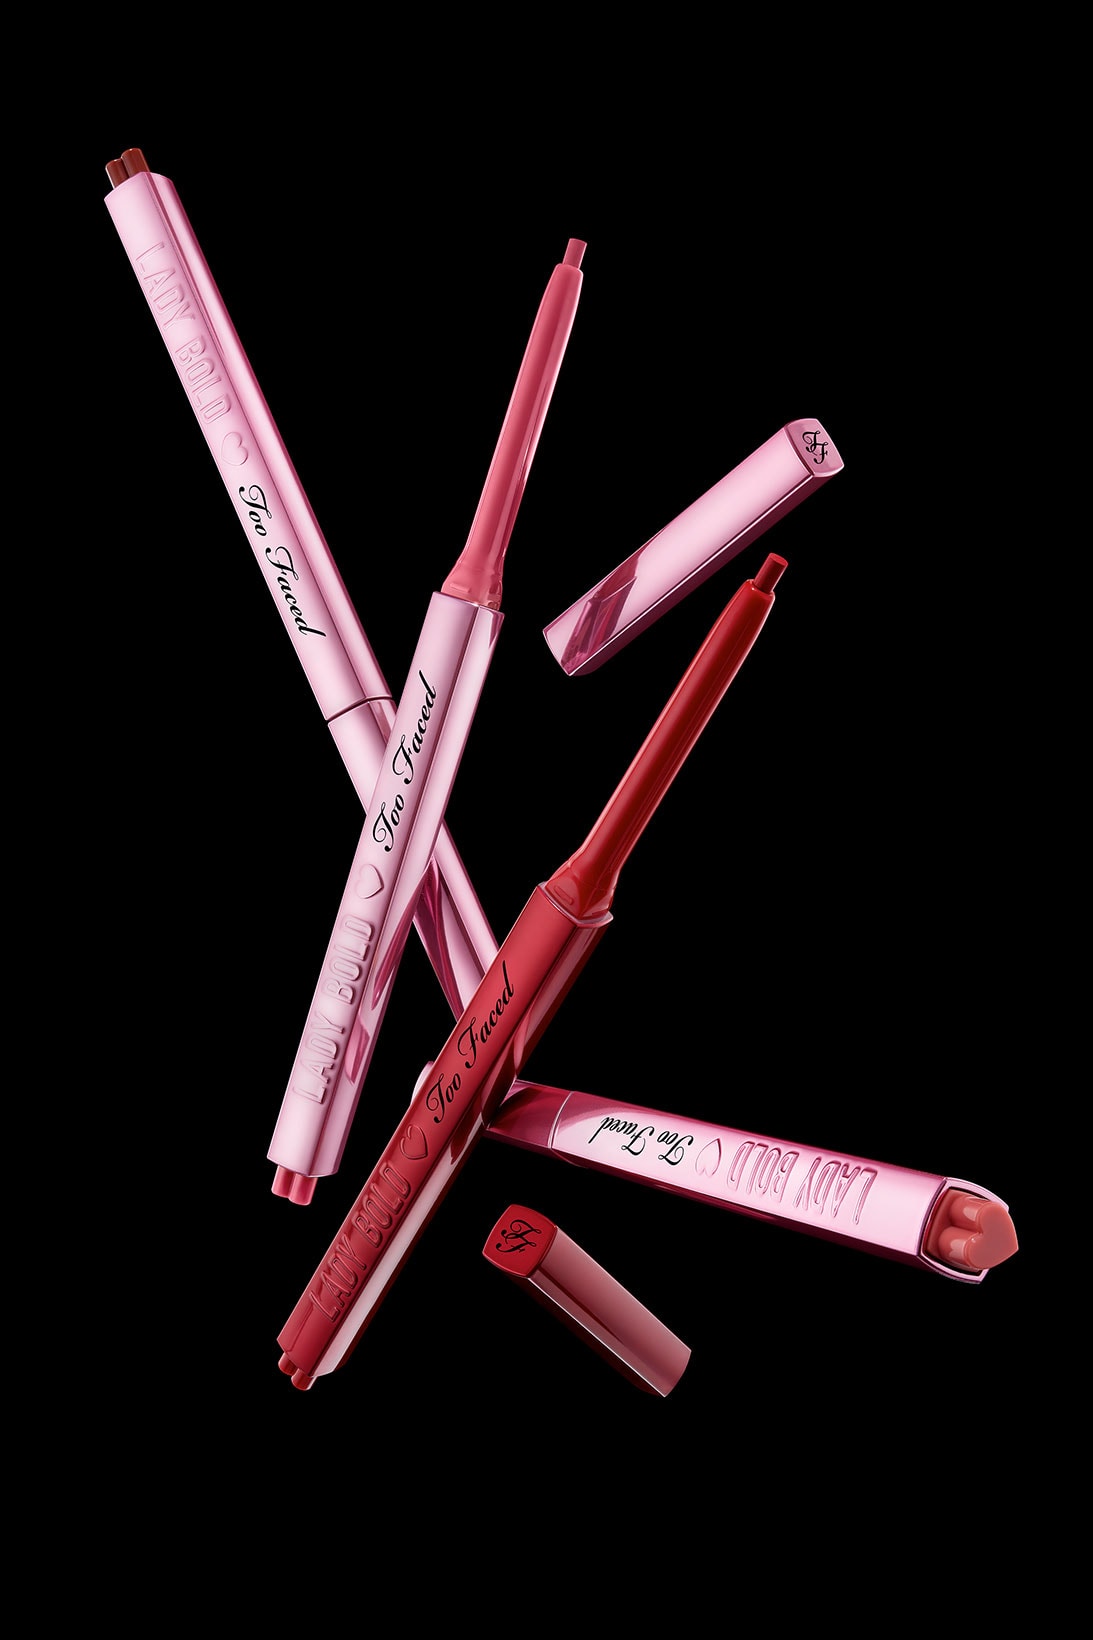 Too Faced Lady Bold Lip Collection Makeup Lip Liners Longwear Waterproof